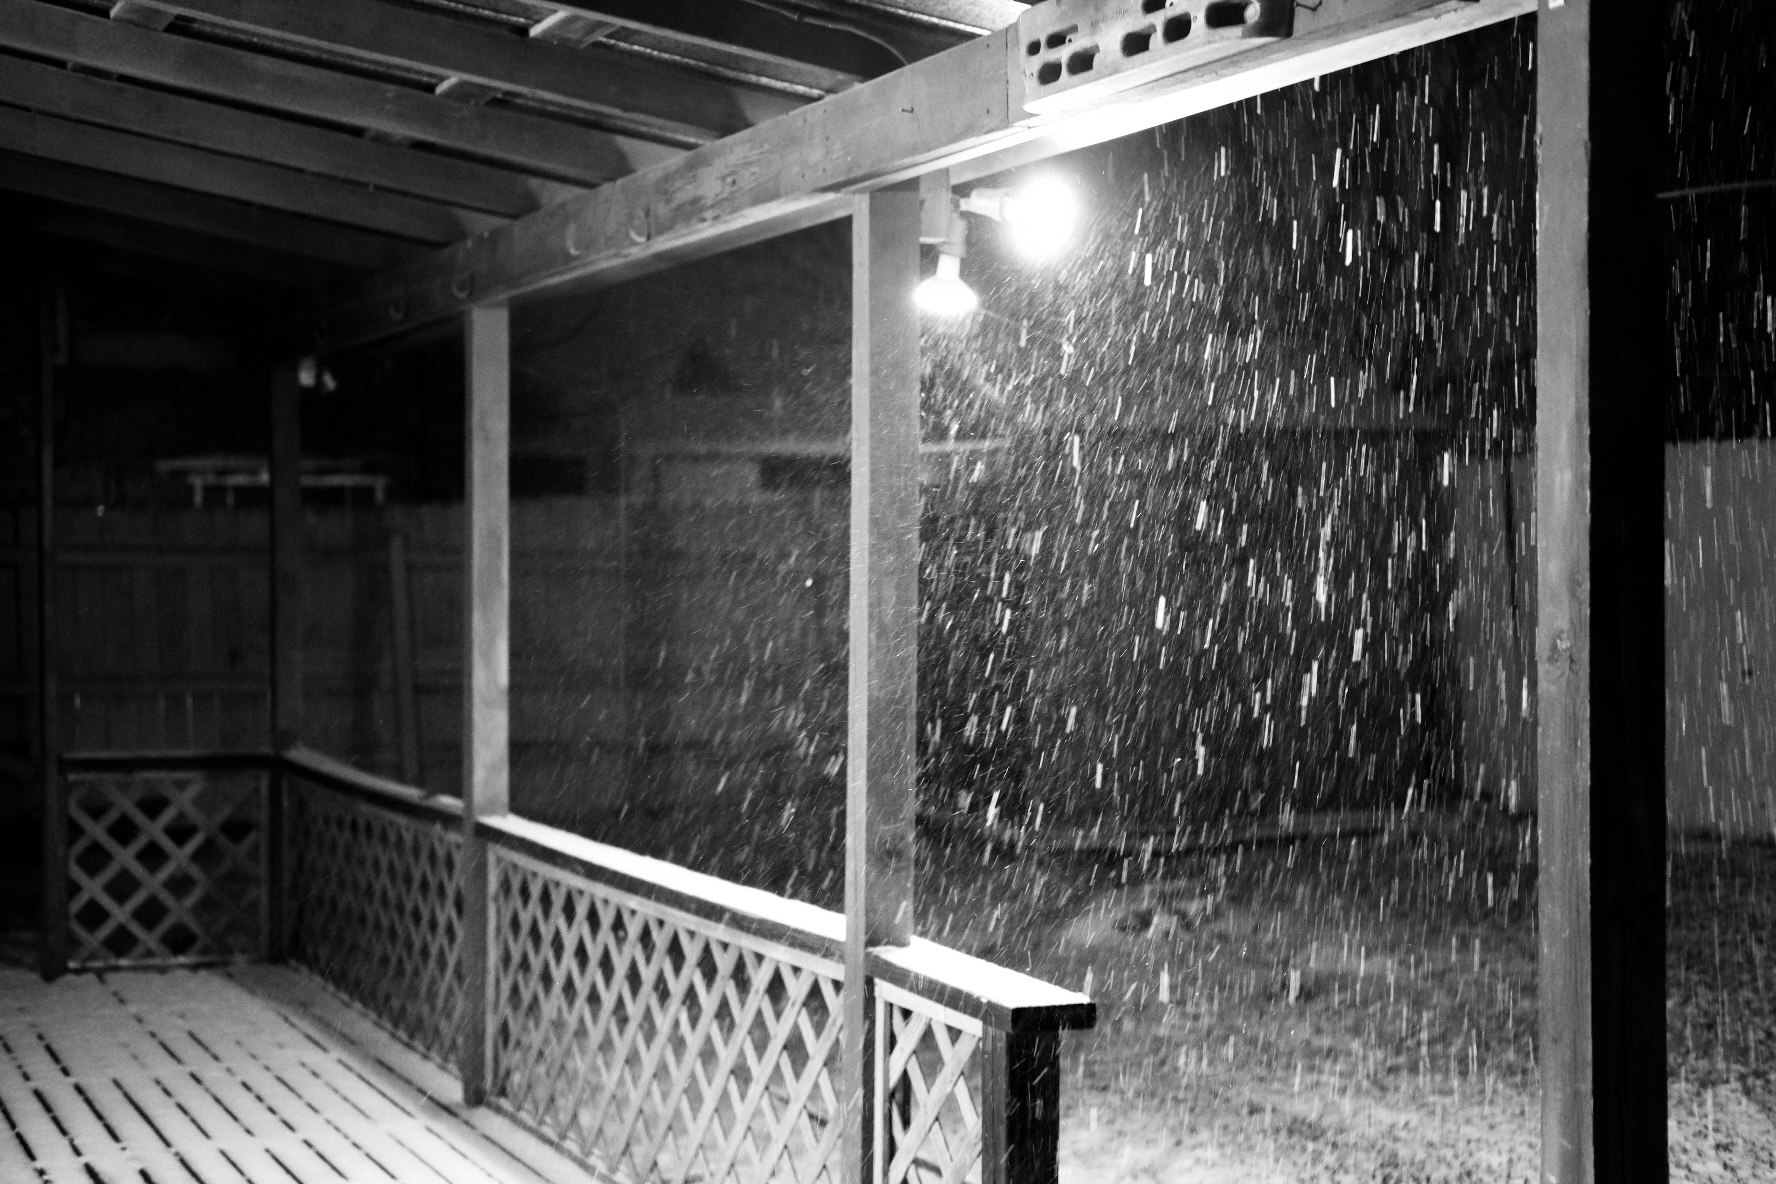 Light snow flurries next to our backyard flood lights. The deck covered in a thin layer of snow under the awning. A small shed sit in the corner of the yard.